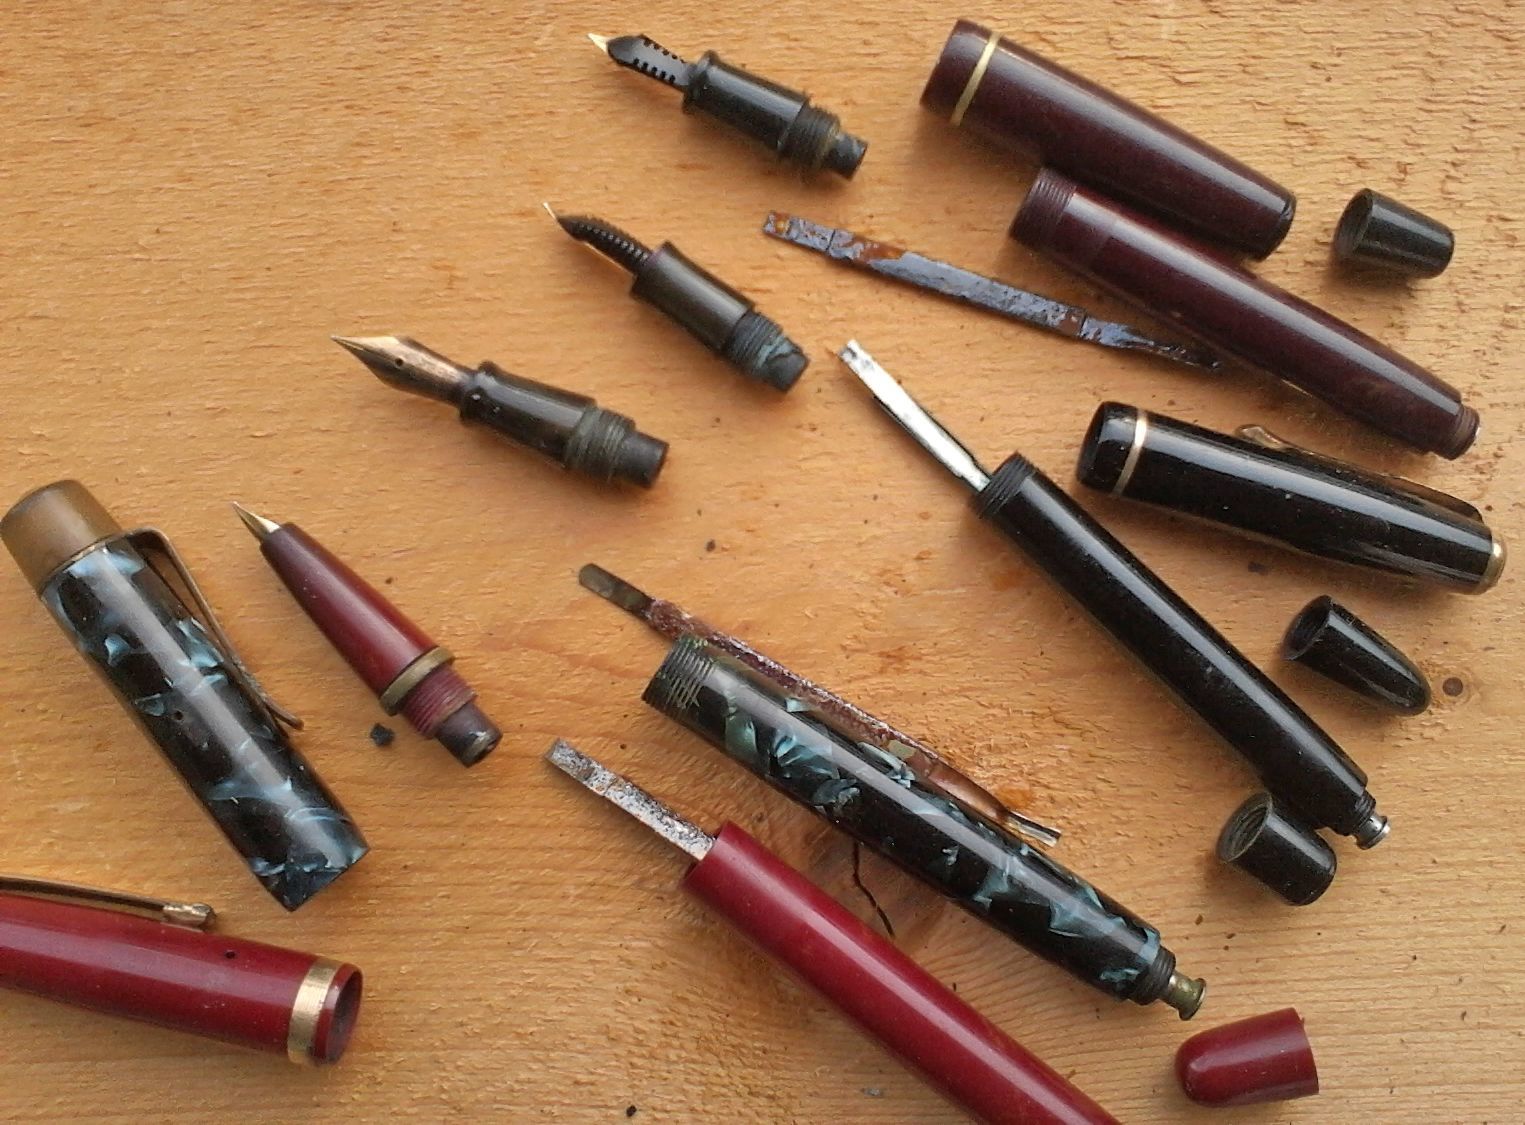 How to Clean a Fountain Pen - Disassembled Pen